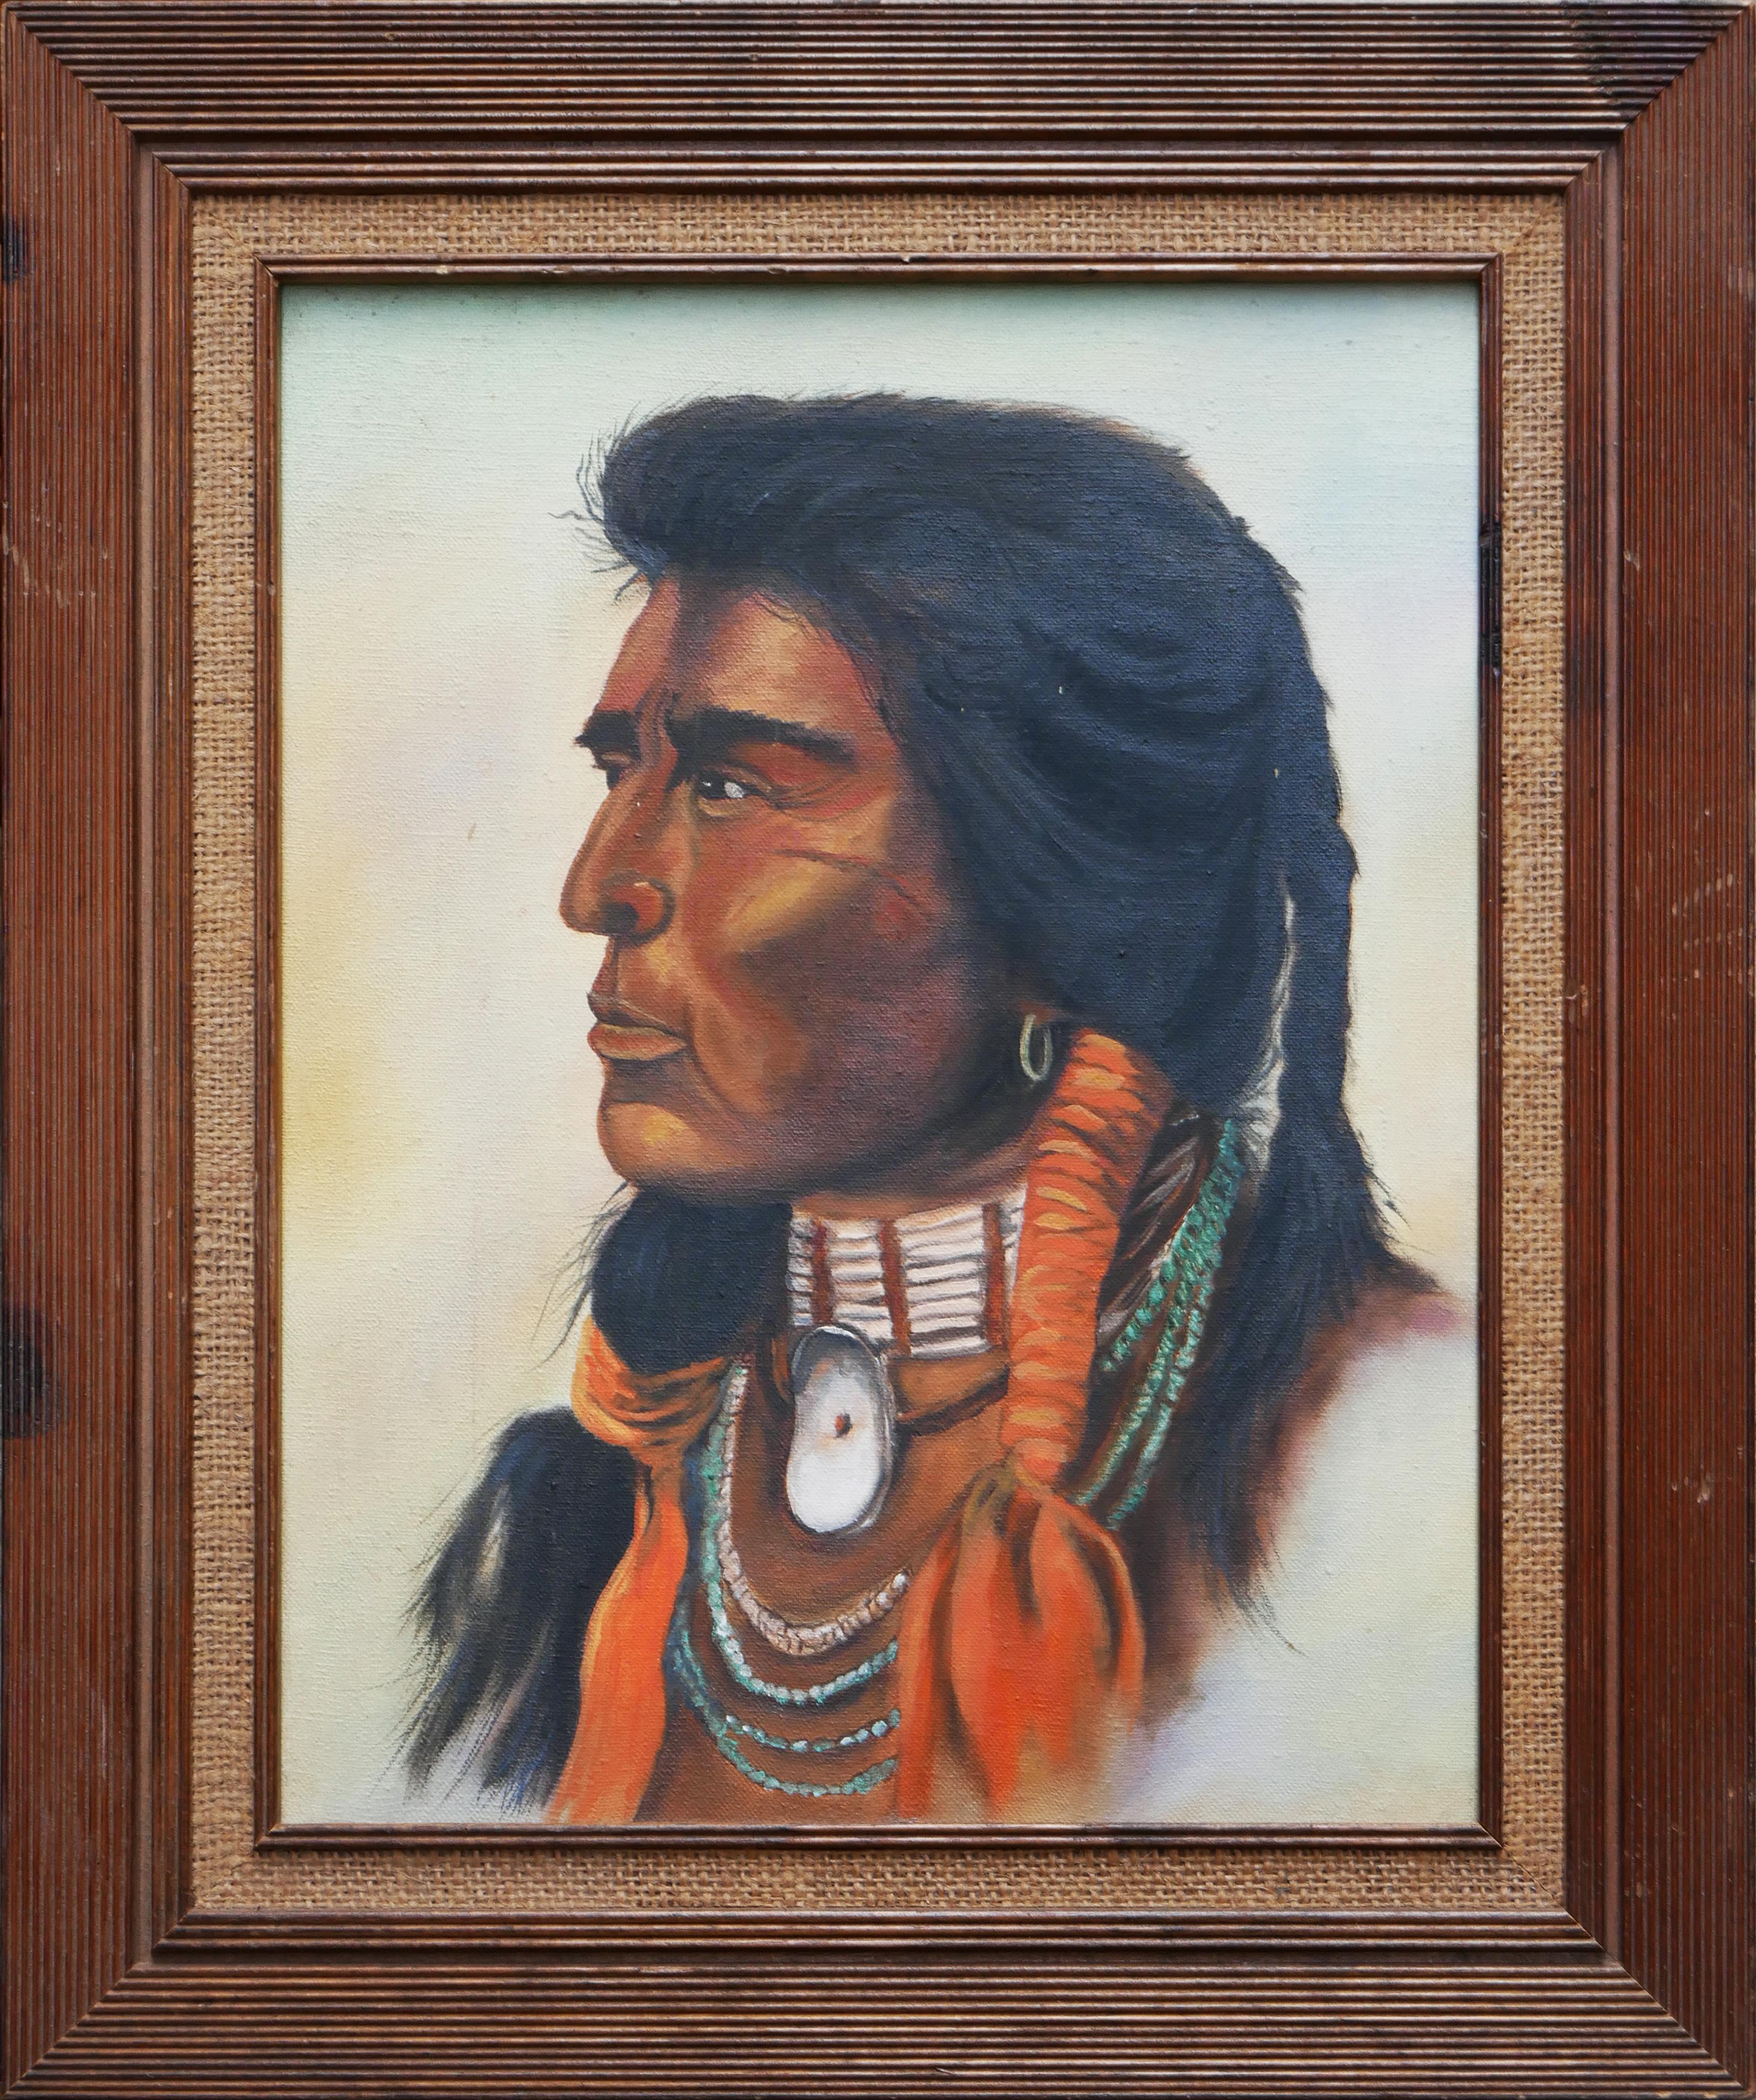 Unknown Abstract Painting - Naturalistic Neutral Toned Portrait Bust of a Native American Male Figure